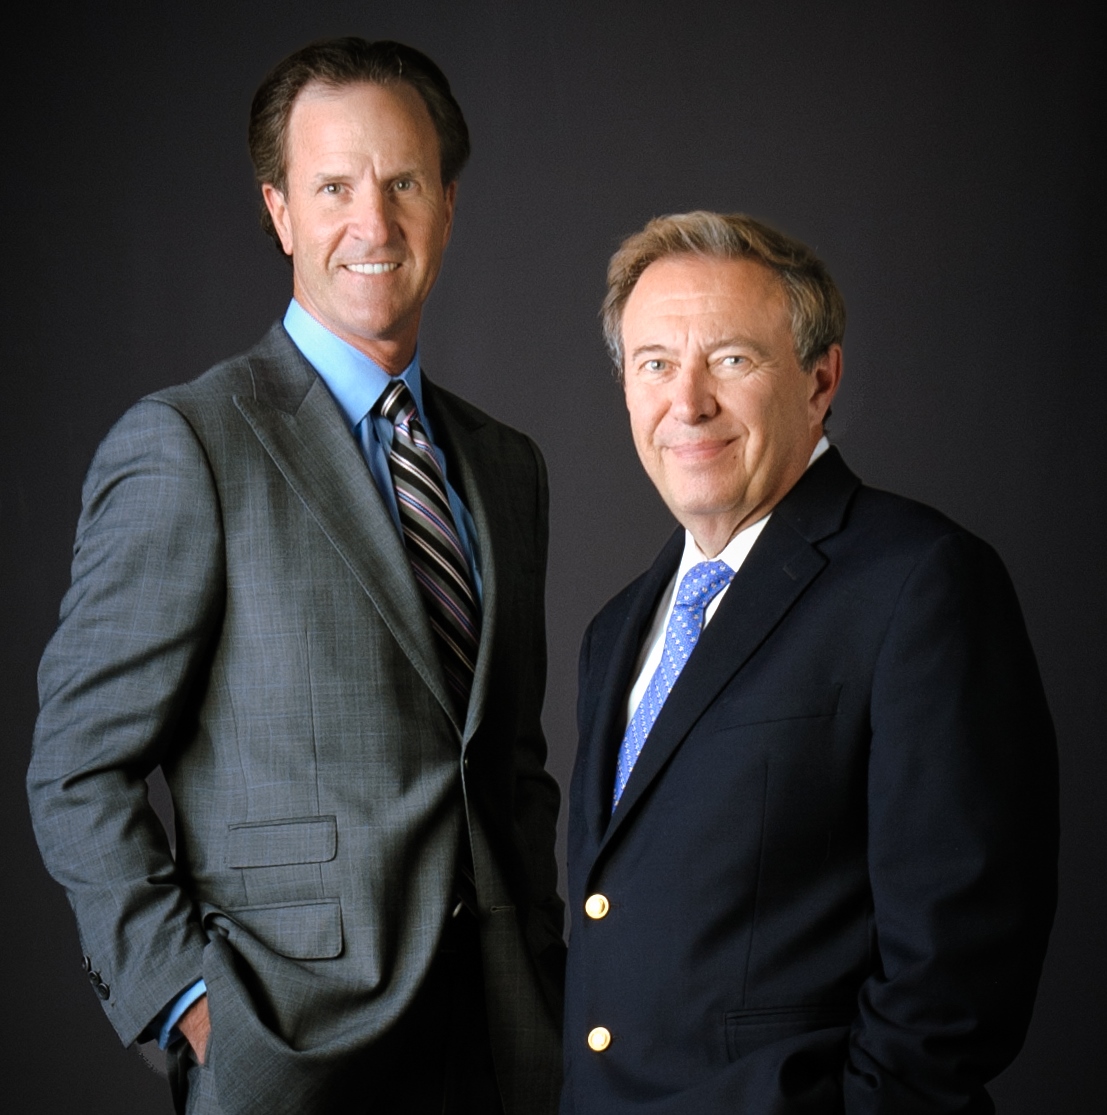 Drs. Mark Anderson and Walter Gaman are founding partners of Executive Medicine of Texas and leaders in preventative and proactive health.